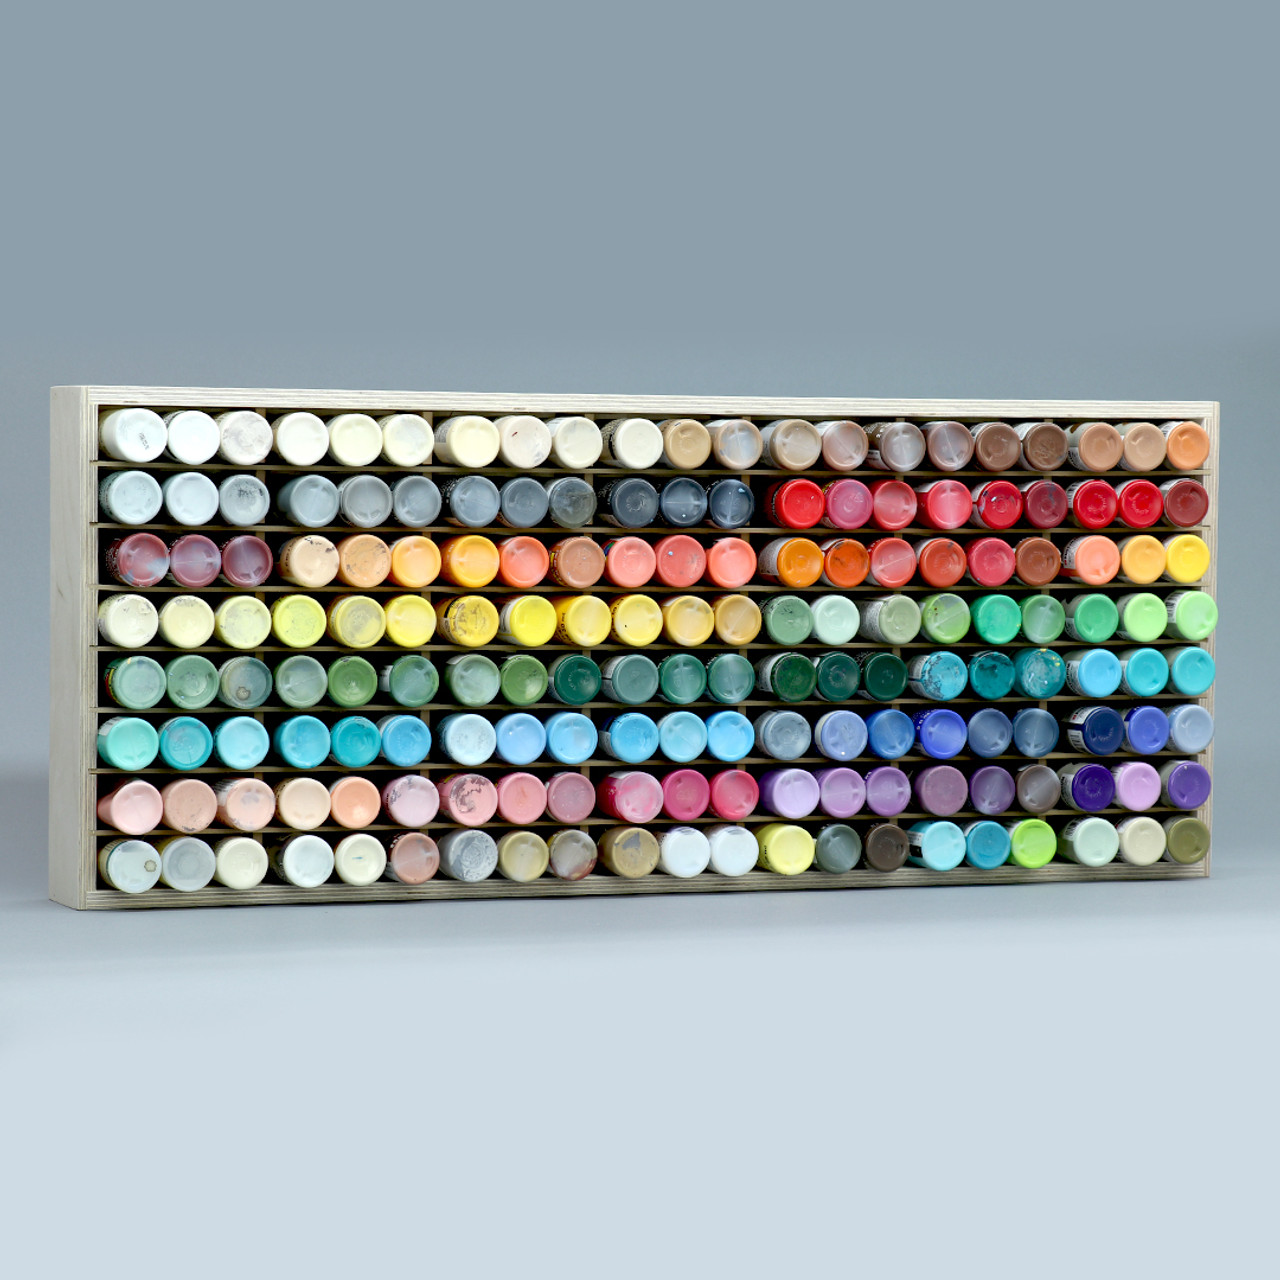 Acrylic Paint Holder and Storage Solution